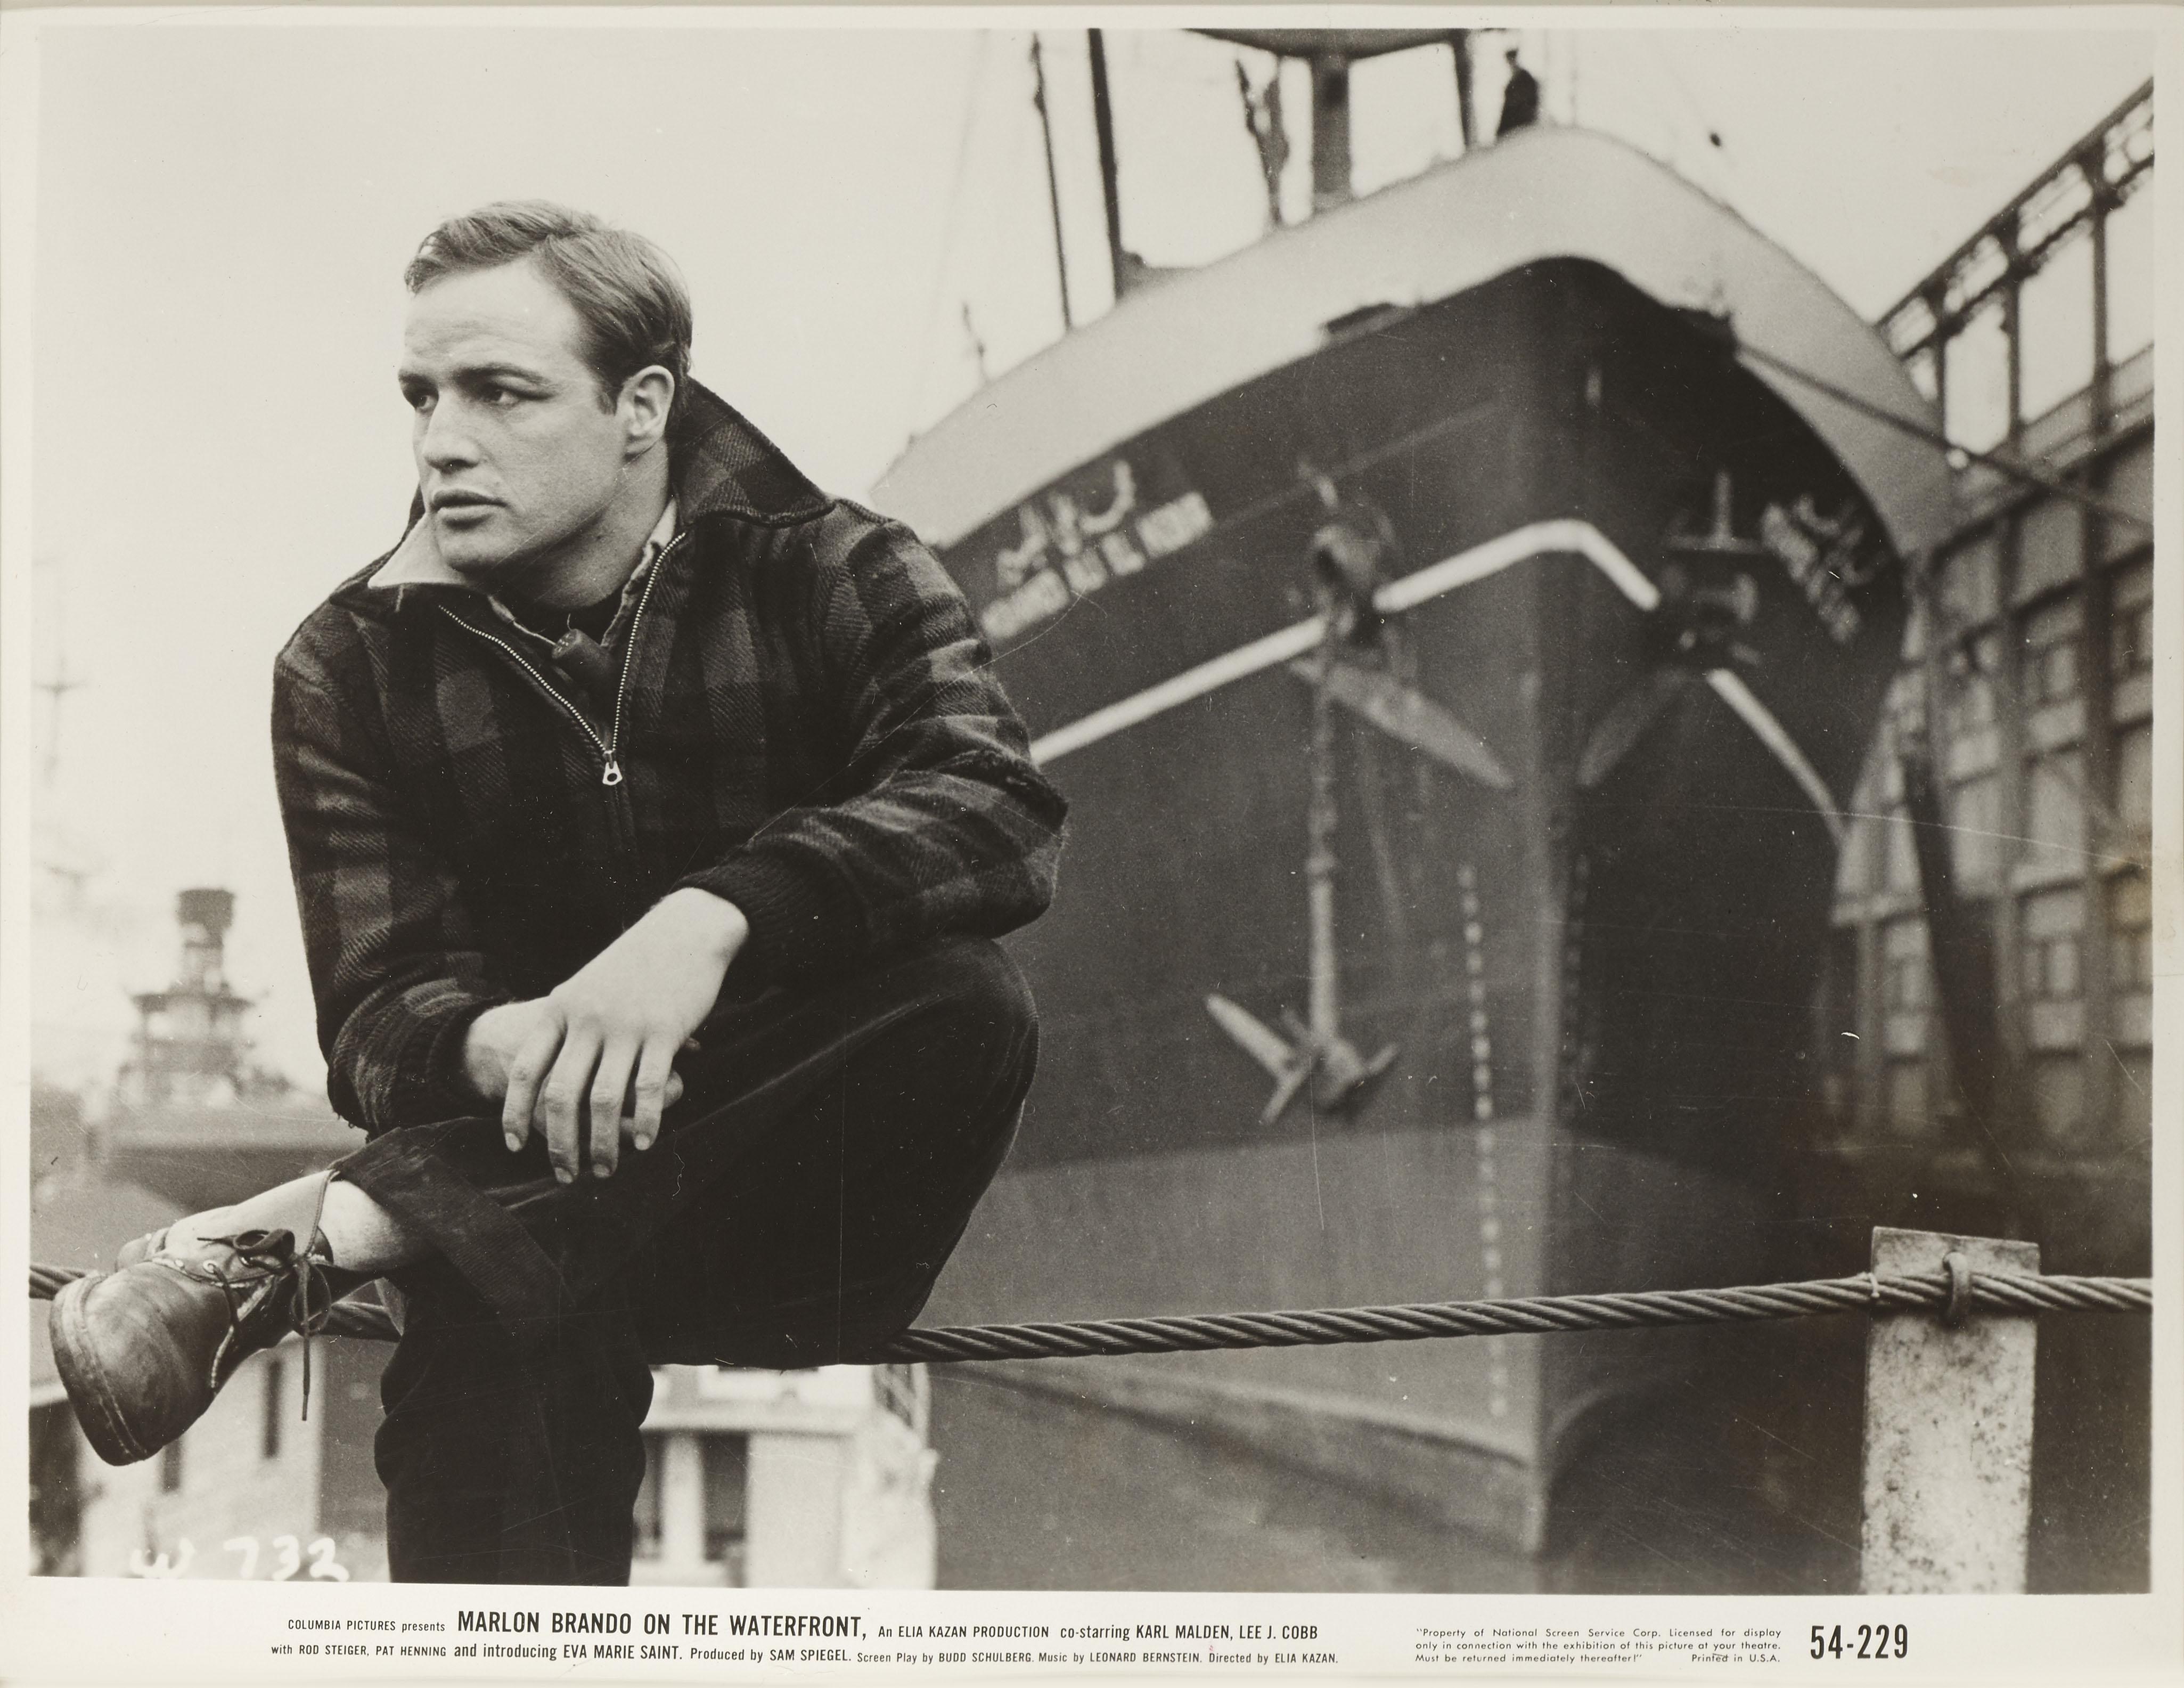 Original American photographic production still.
For the 1954 classic drama On the Waterfront. The film starred Marlon Brando, Karl Malden, Lee J Cobb. Guinness. This film was directed by Elia Kazan.
This piece is framed in a Sapele wood frame with